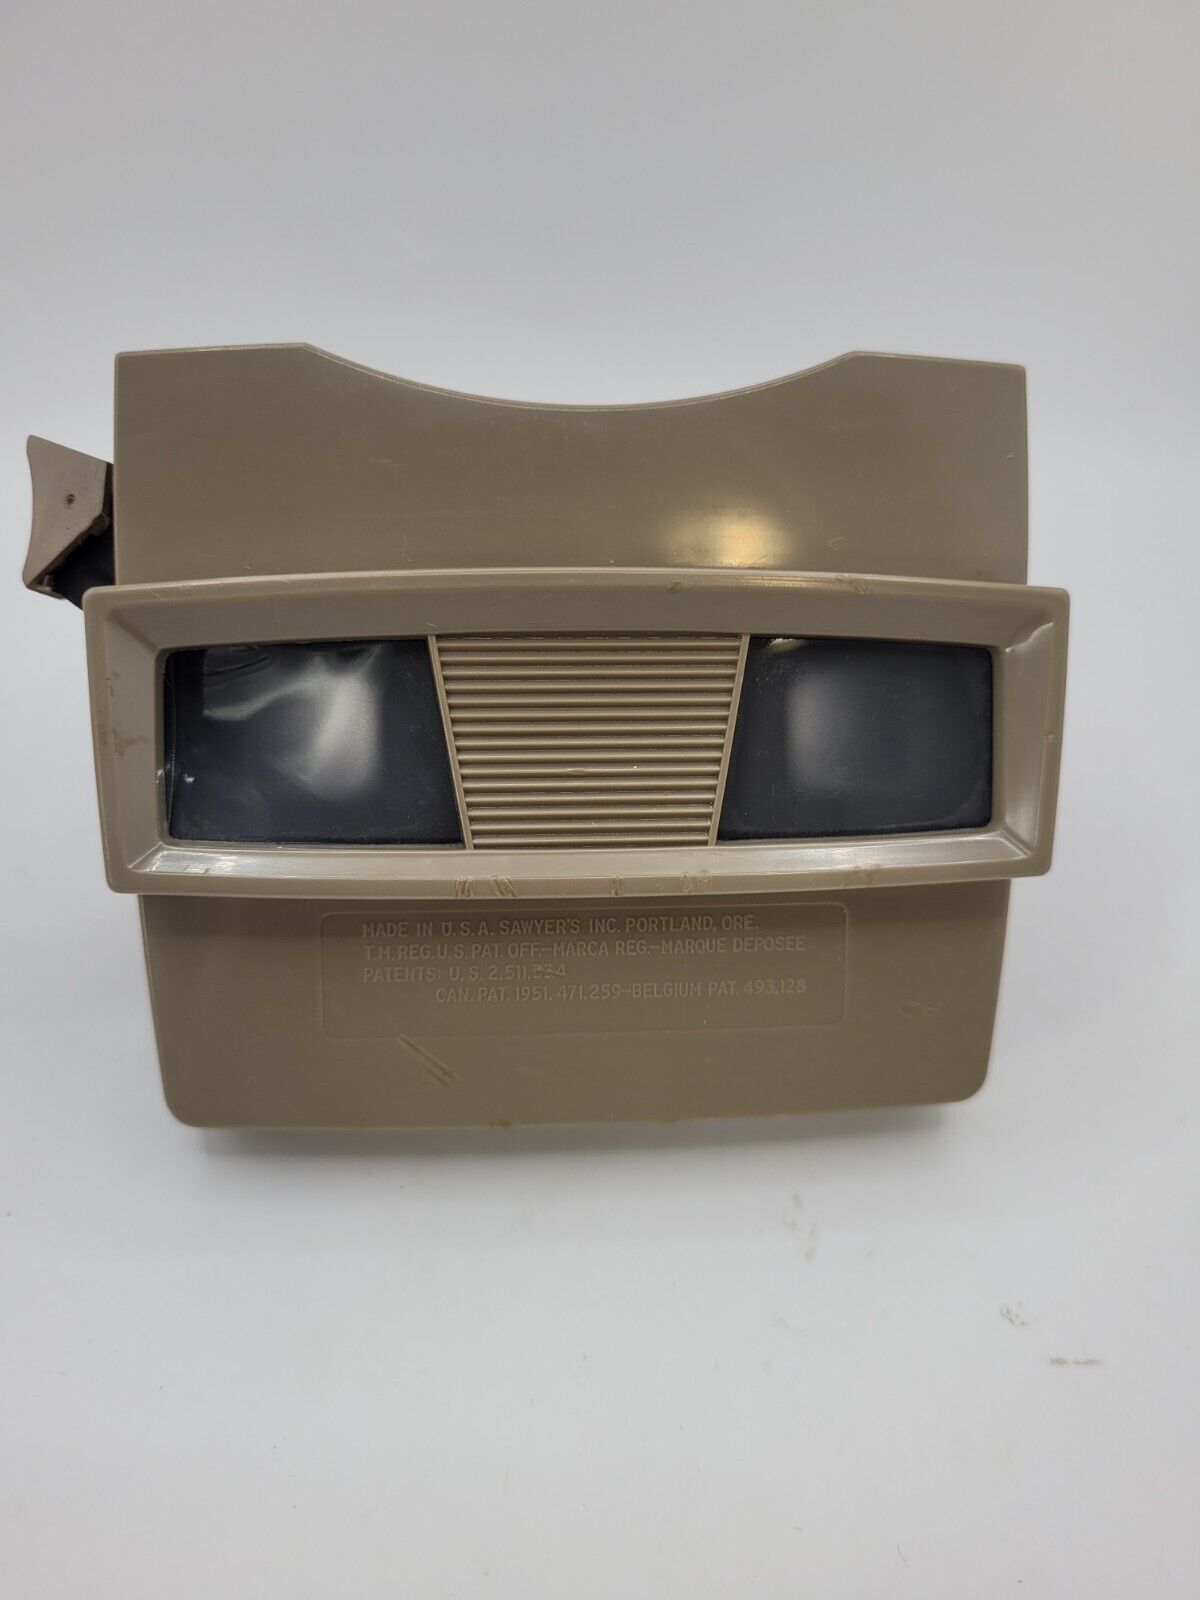 Vintage 1970s Viewmaster Sawyers Inc.